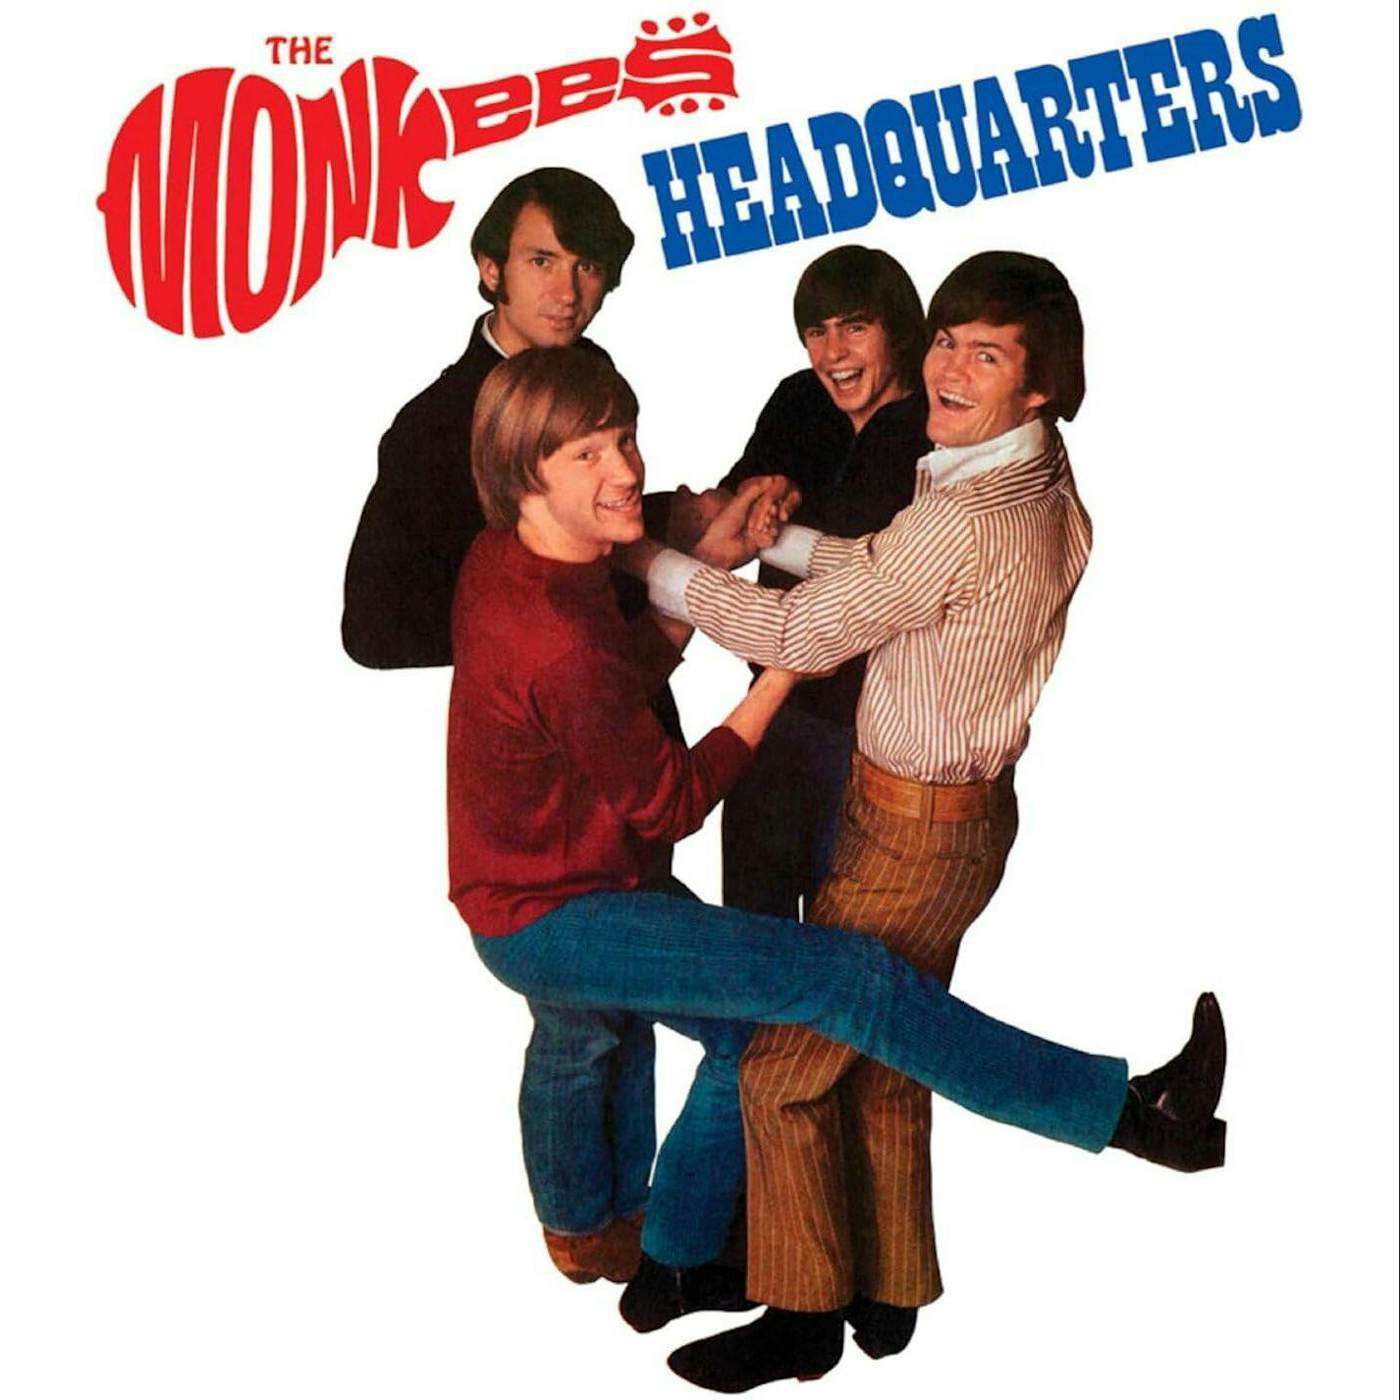 The Monkees Headquarters (Translucent Red) Vinyl Record